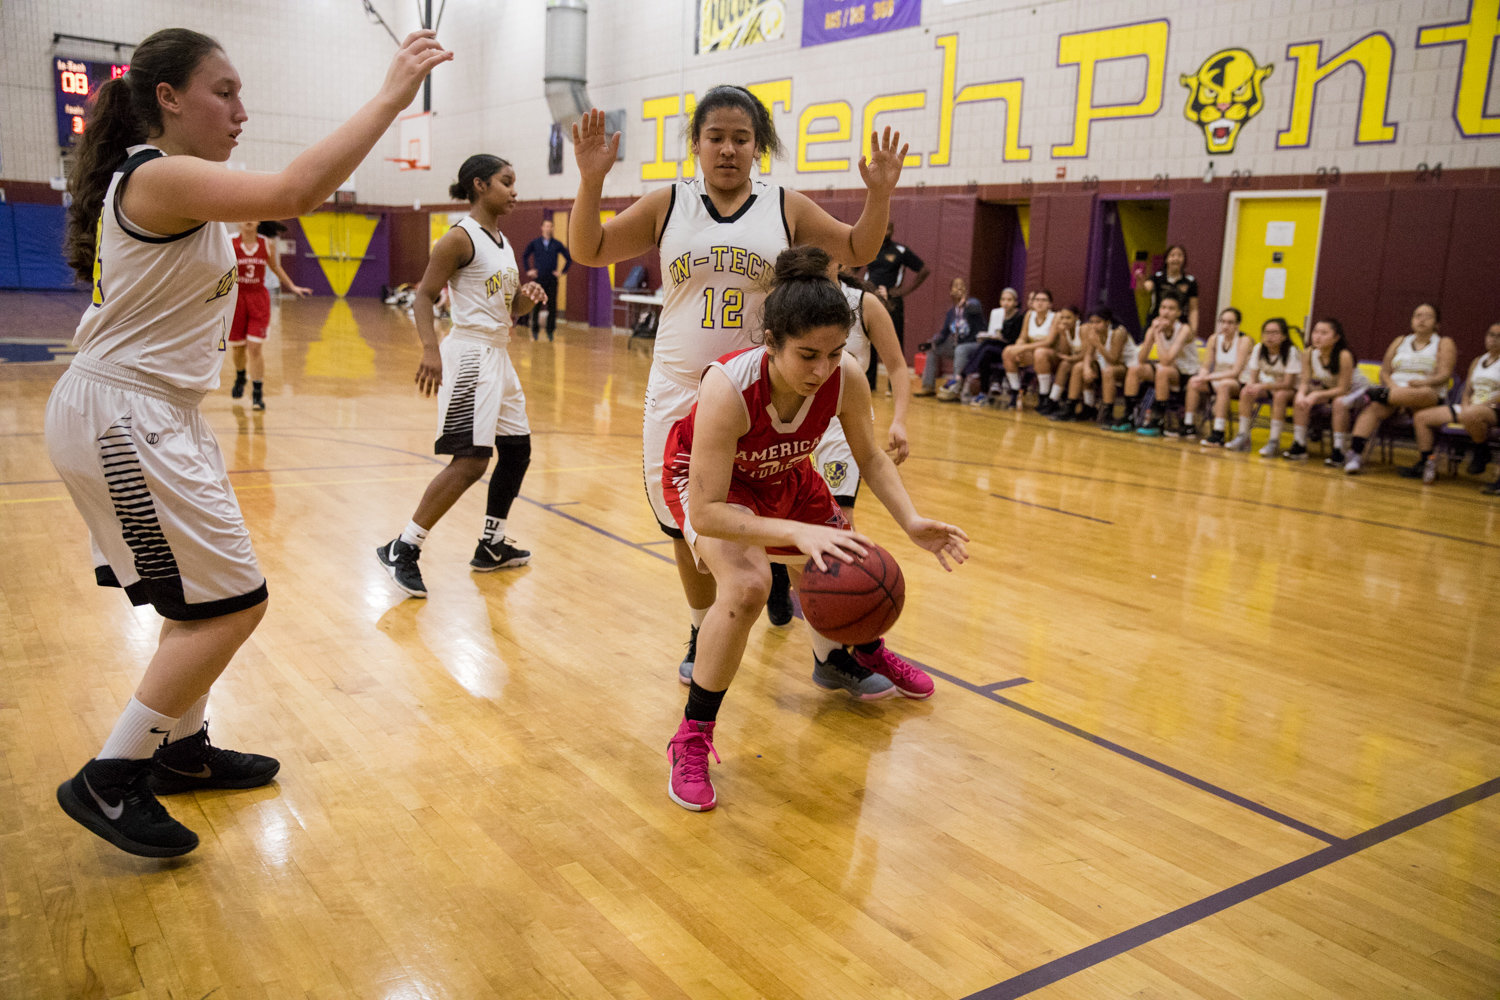 American Studies’ senior Emily Eljamal works her way around several IN-Tech defenders during the Senators recent 54-33 victory, a game which saw her reach the 1,000-point plateau.